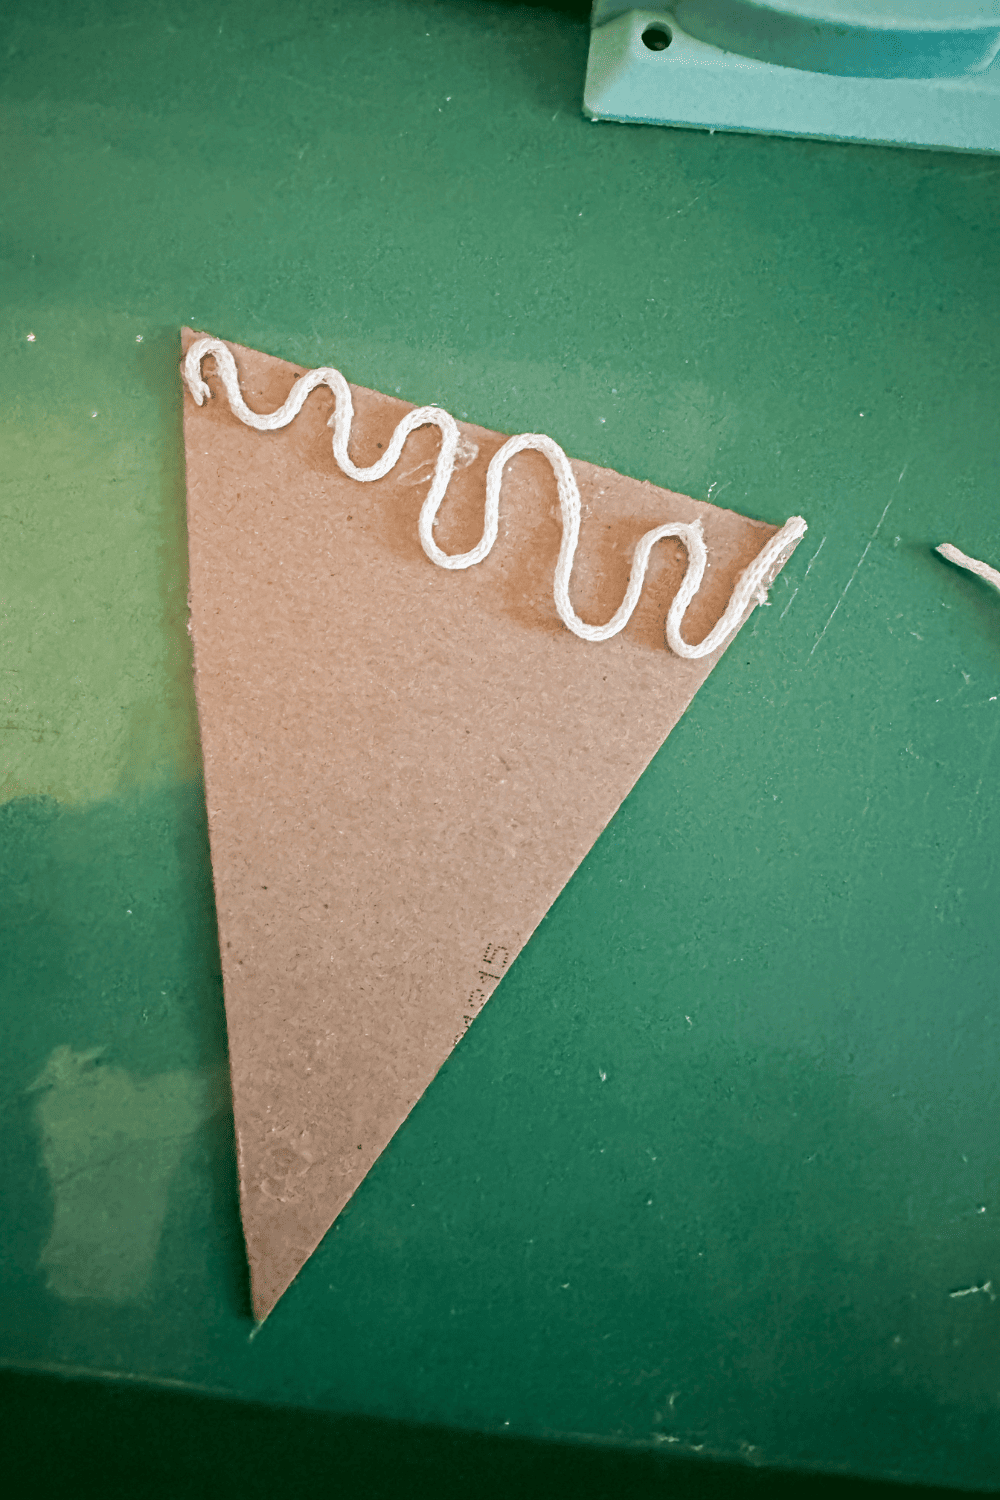 yarn squiggly line on the top of the cardboard triangle